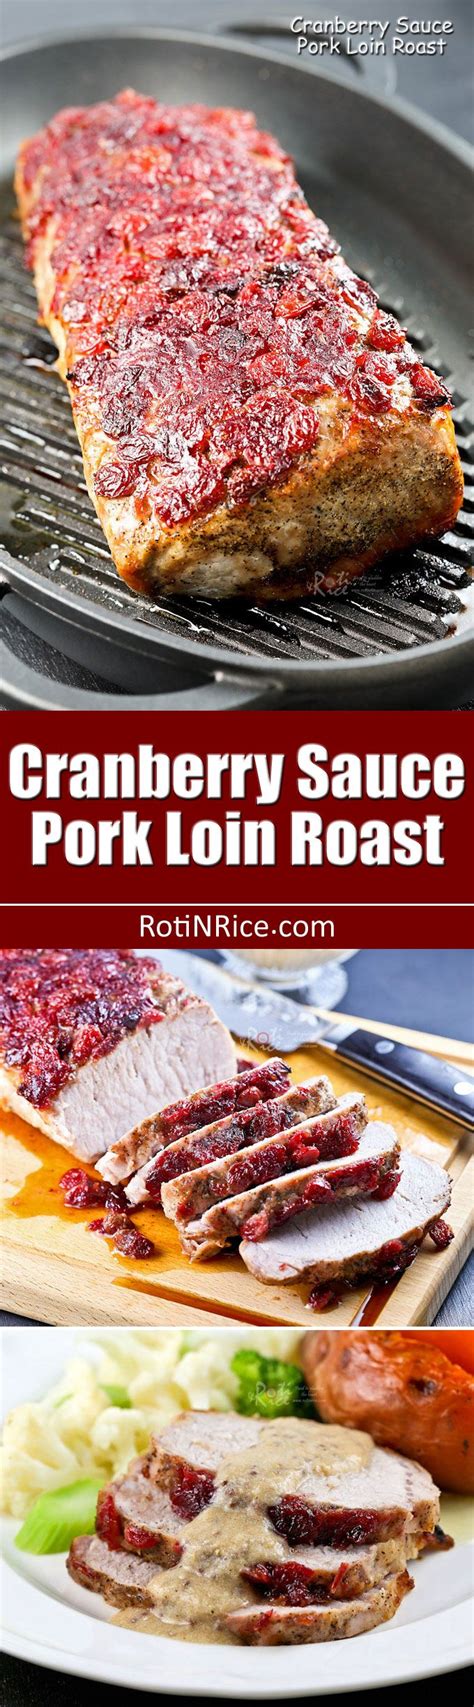 I just made a pork roast yesterday, and might give this a try. Cranberry Sauce Pork Loin Roast | Recipe | Pork loin ...